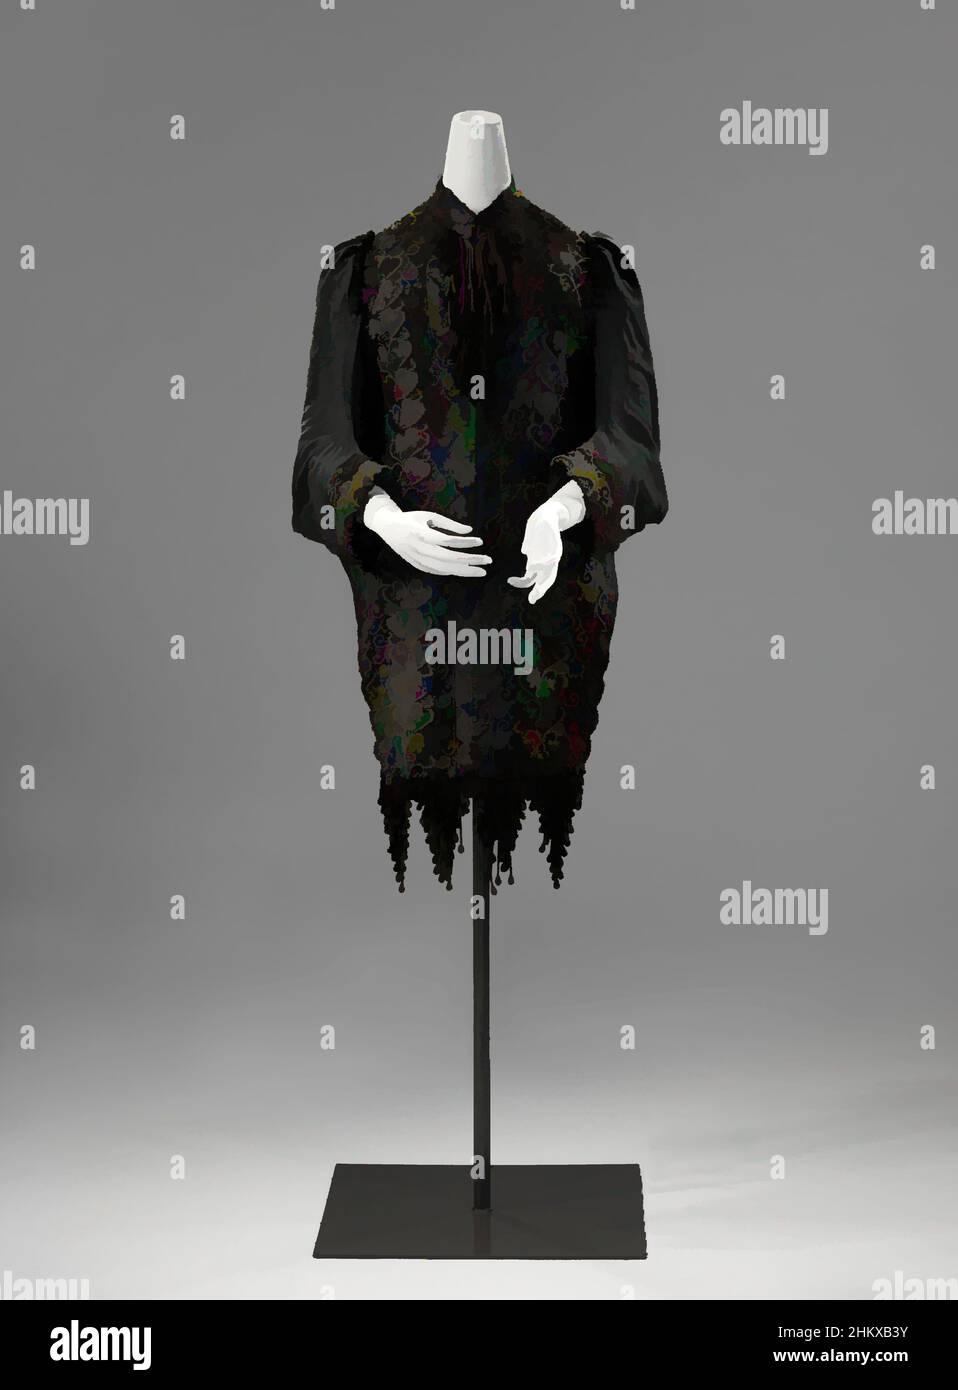 Art inspired by Dolman coat with lace, Cloak of black wool, consisting of long straight slips and four double lapels with wide passement, decorated with black machine lace, beads, cord and tassels, Cloak of black wool, consisting of long straight slips and four double lapels with wide, Classic works modernized by Artotop with a splash of modernity. Shapes, color and value, eye-catching visual impact on art. Emotions through freedom of artworks in a contemporary way. A timeless message pursuing a wildly creative new direction. Artists turning to the digital medium and creating the Artotop NFT Stock Photo